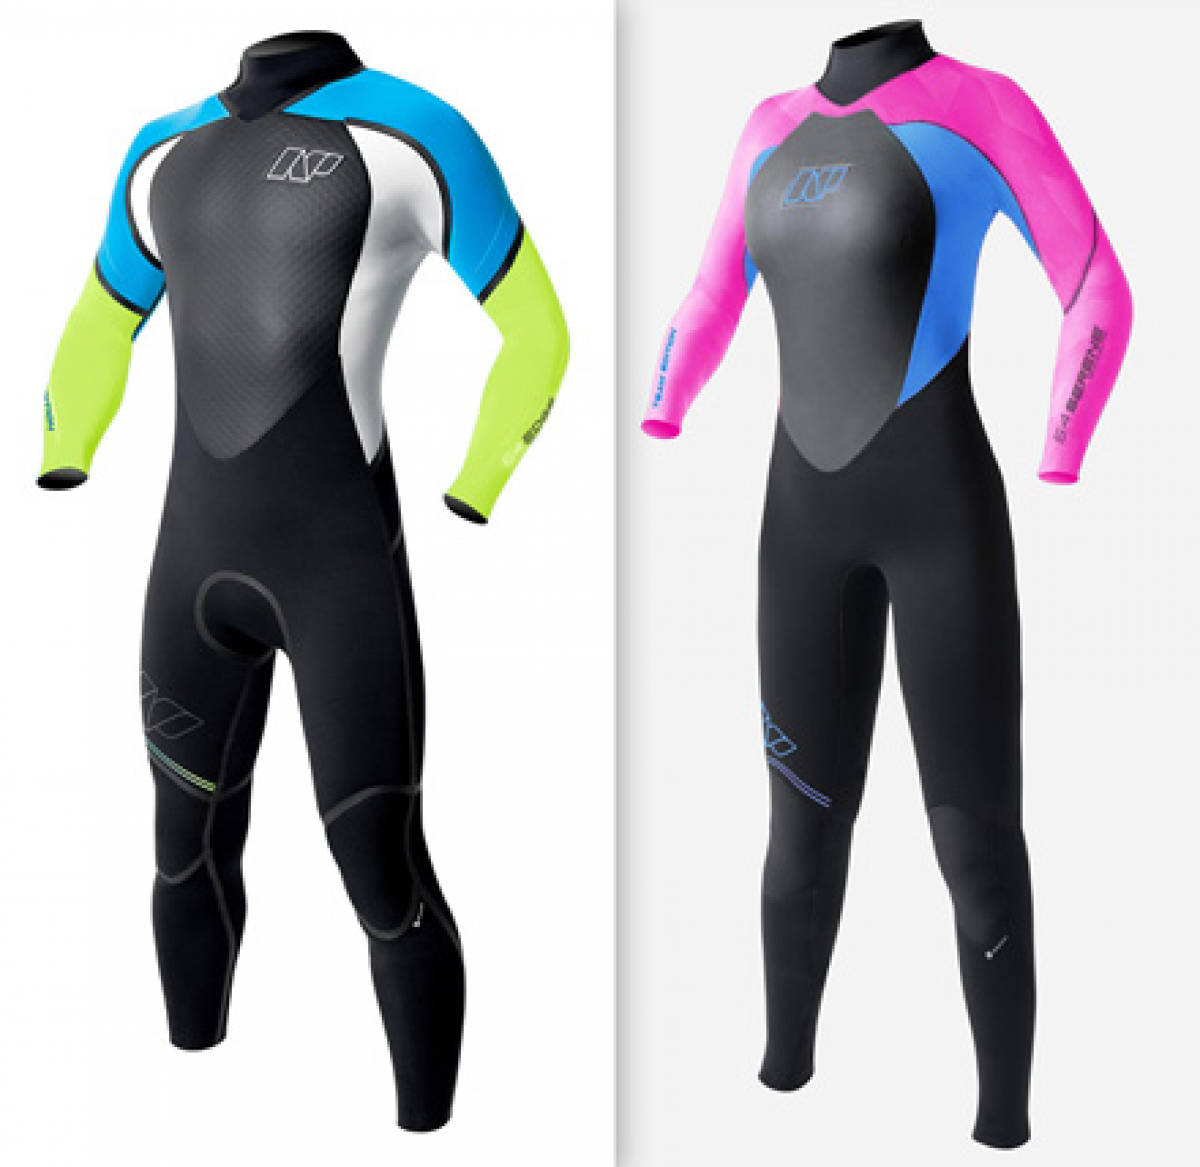 TeamEdition Wetsuits - NP Edge & Serene